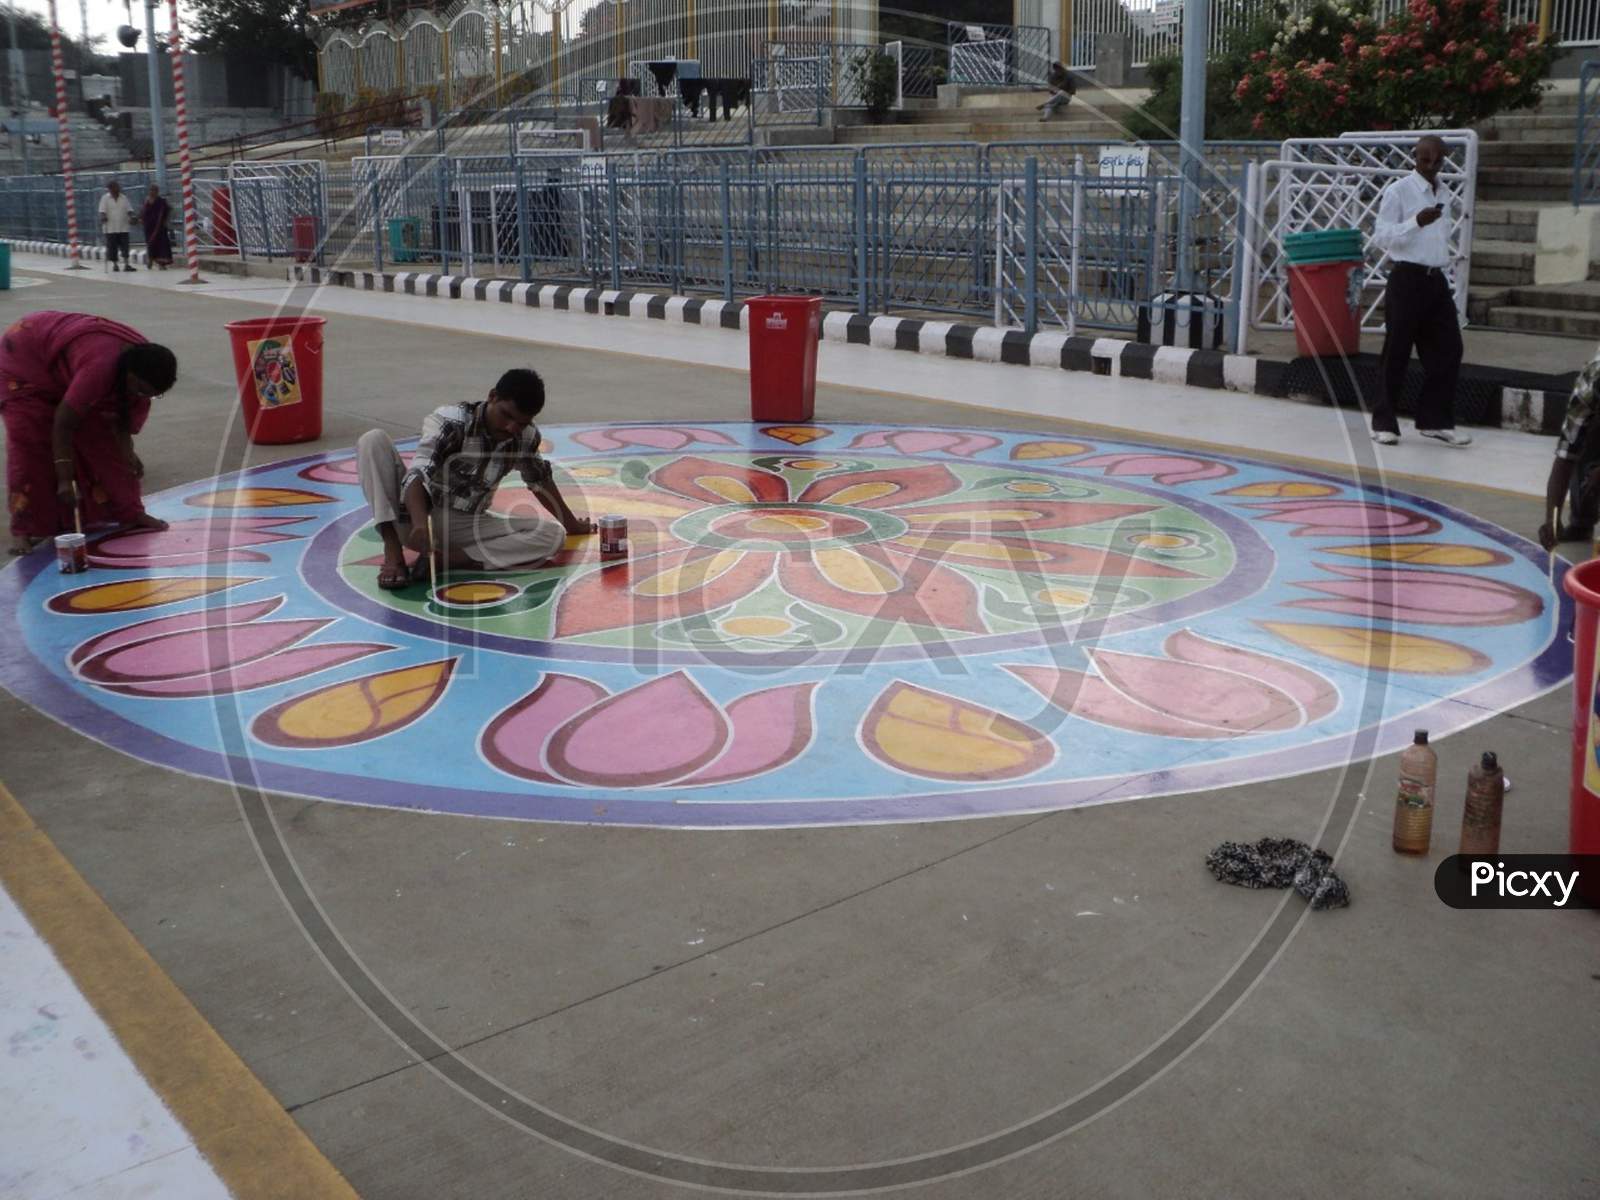 Painting on Road at Tirupati.Its a Editorial Photo don't use it as a commercial photo.